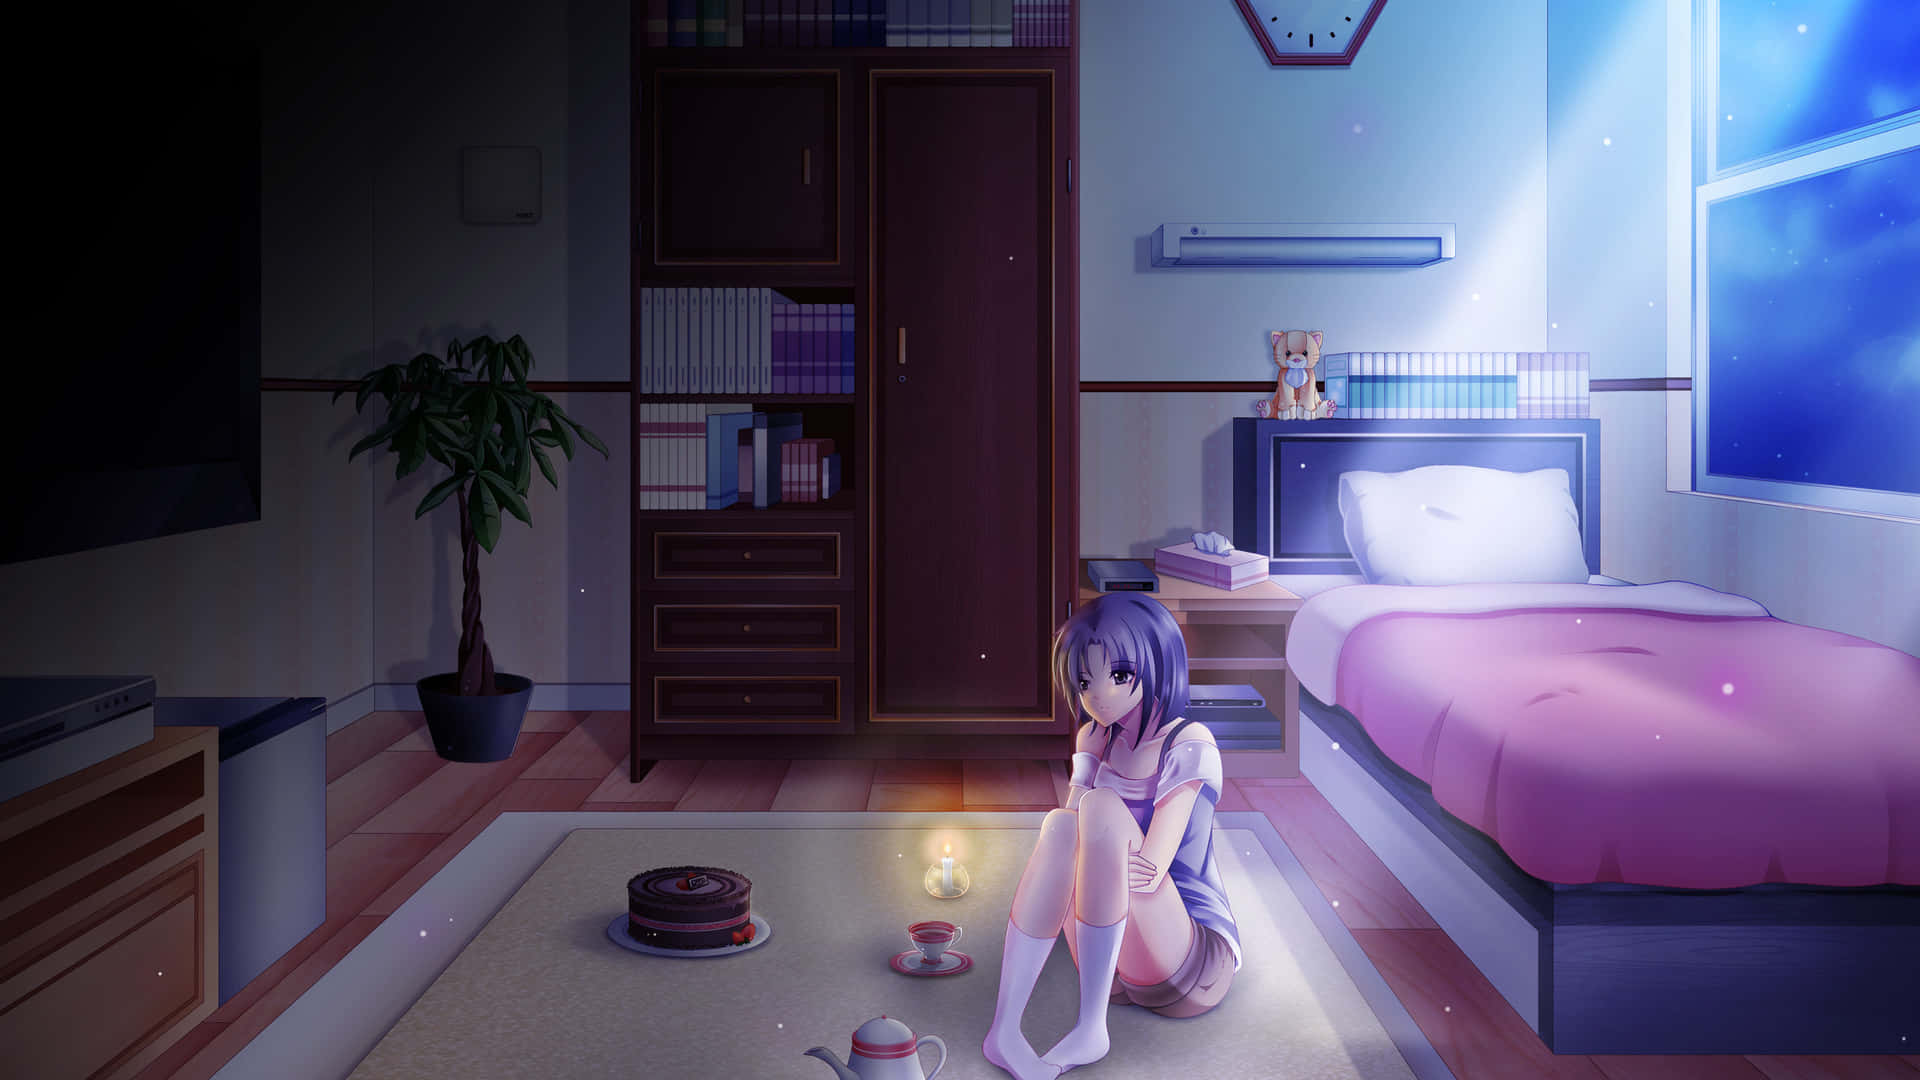 A Girl Sitting On The Floor In A Room